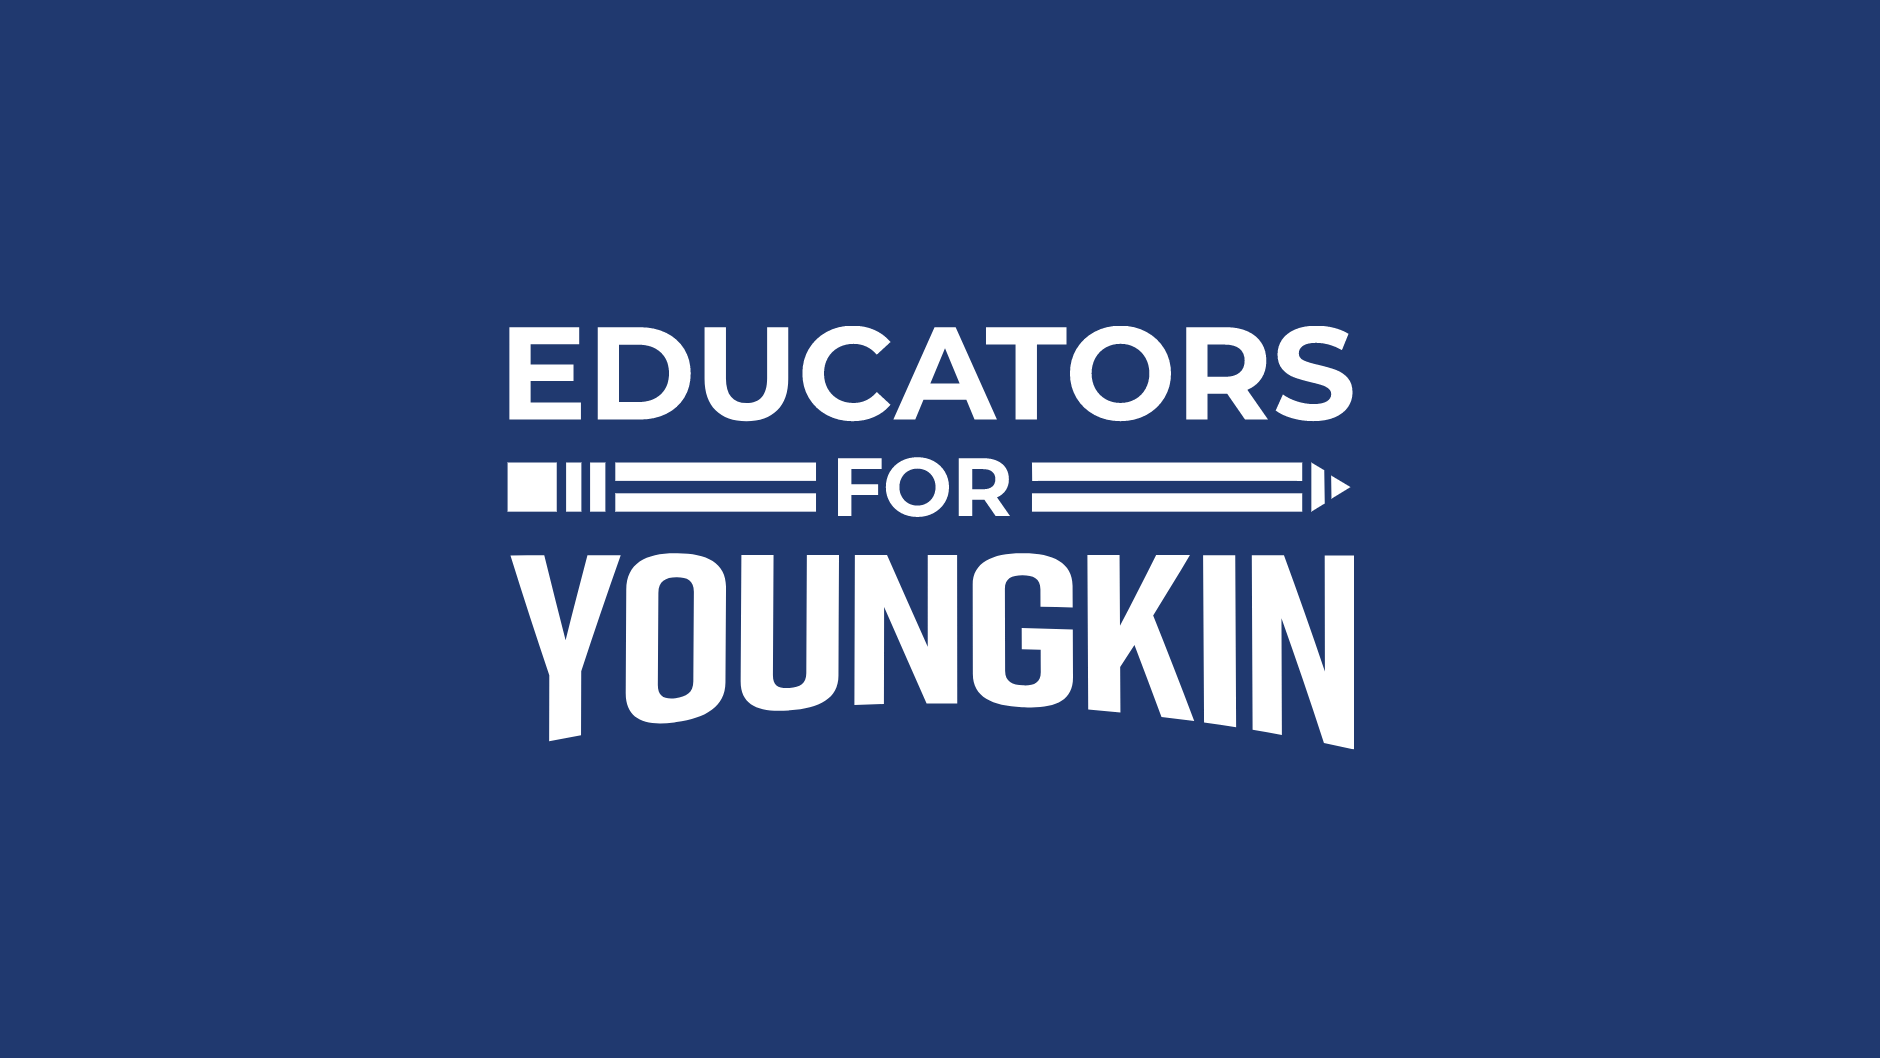 Political outsider, successful business leader, and Republican nominee for governor Glenn Youngkin announced today the launch of “Educators for Youngkin,” a coalition of teachers, parents, educators, and community members across Virginia that are committed to restoring excellence in education. Glenn Youngkin and the Educators for Youngkin Coalition will work to fix standards and underperformance in all Virginia schools.